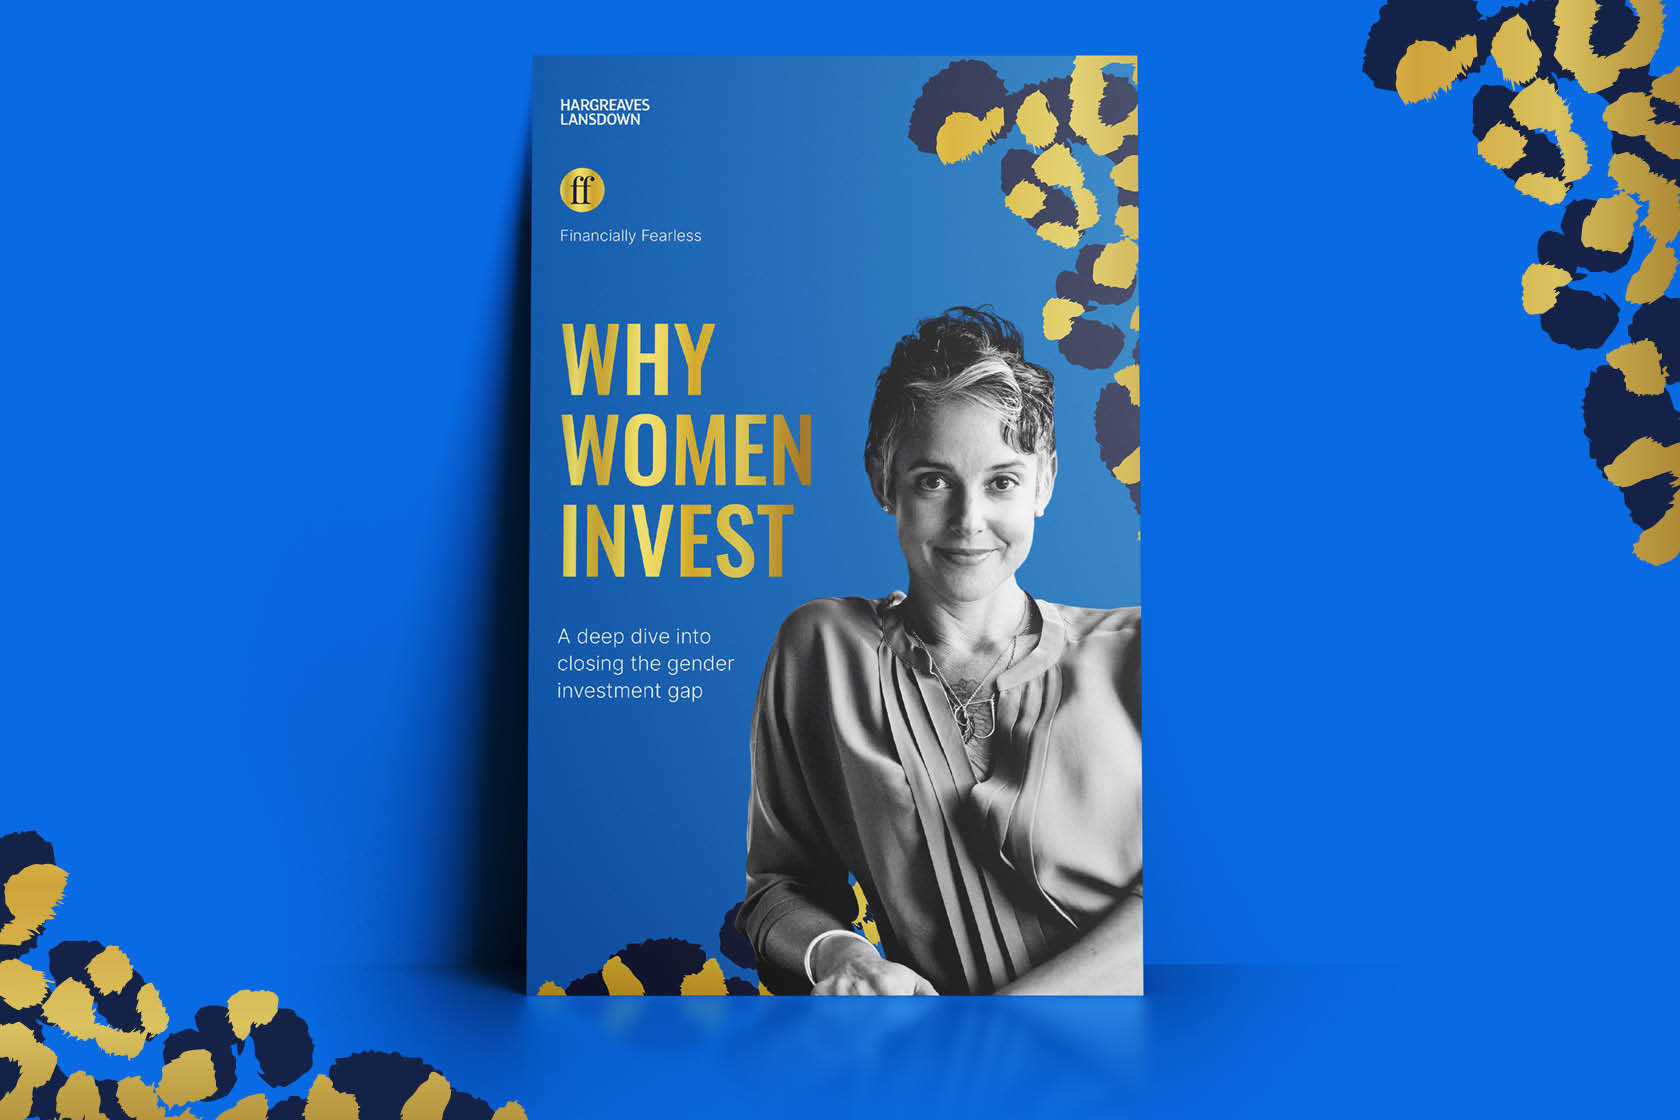 Why women invest report